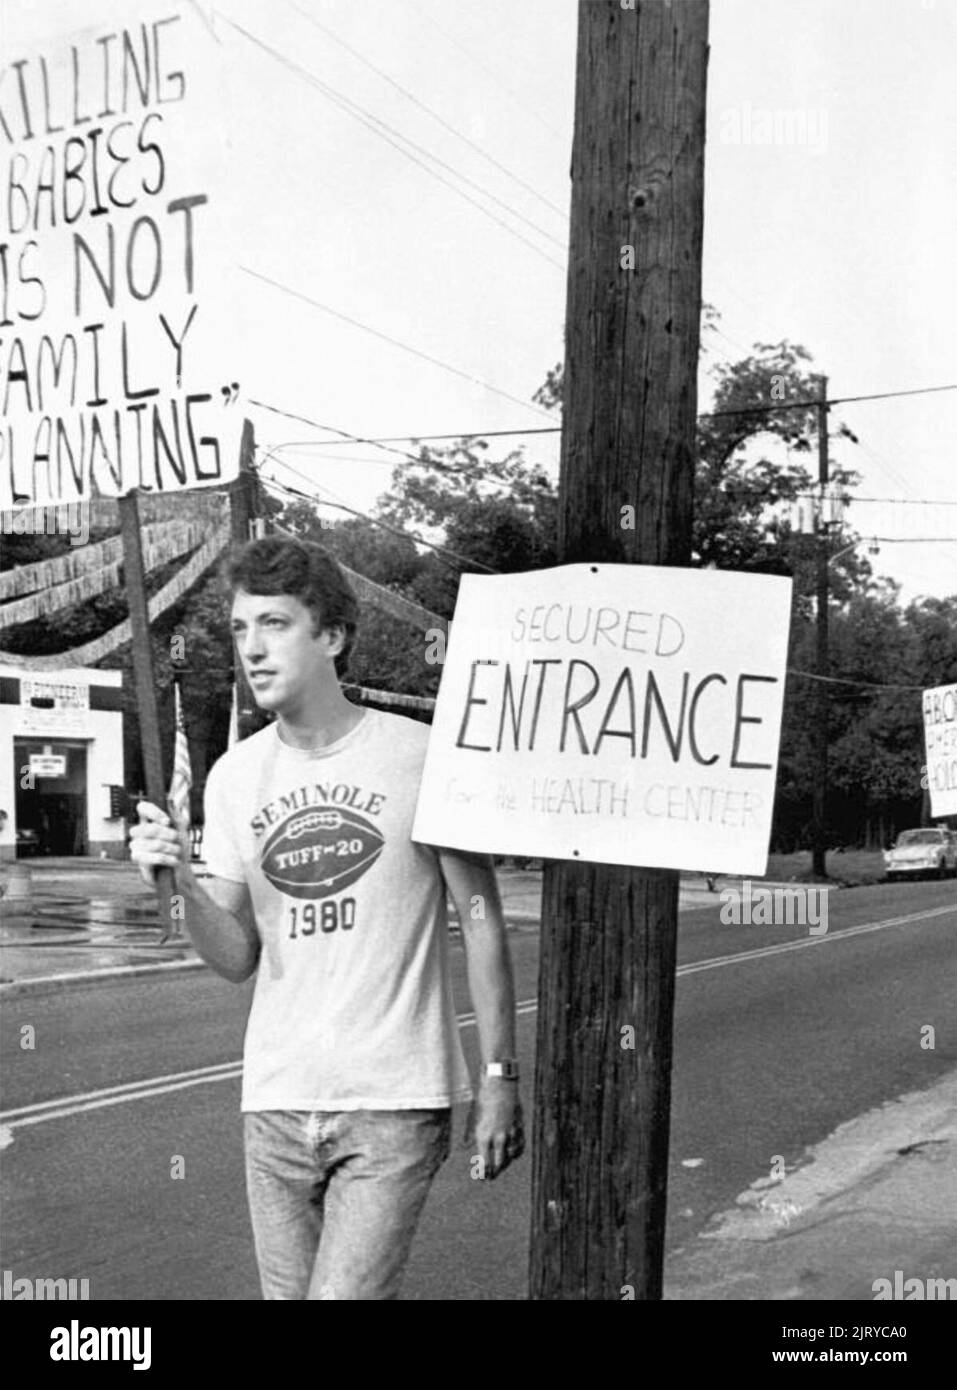 Demonstrators protest the killing of babies by abortion at the Tallahassee Feminist Women's Health Center in Tallahassee, Florida, near the Florida State University campus in 1980. (USA) Stock Photo